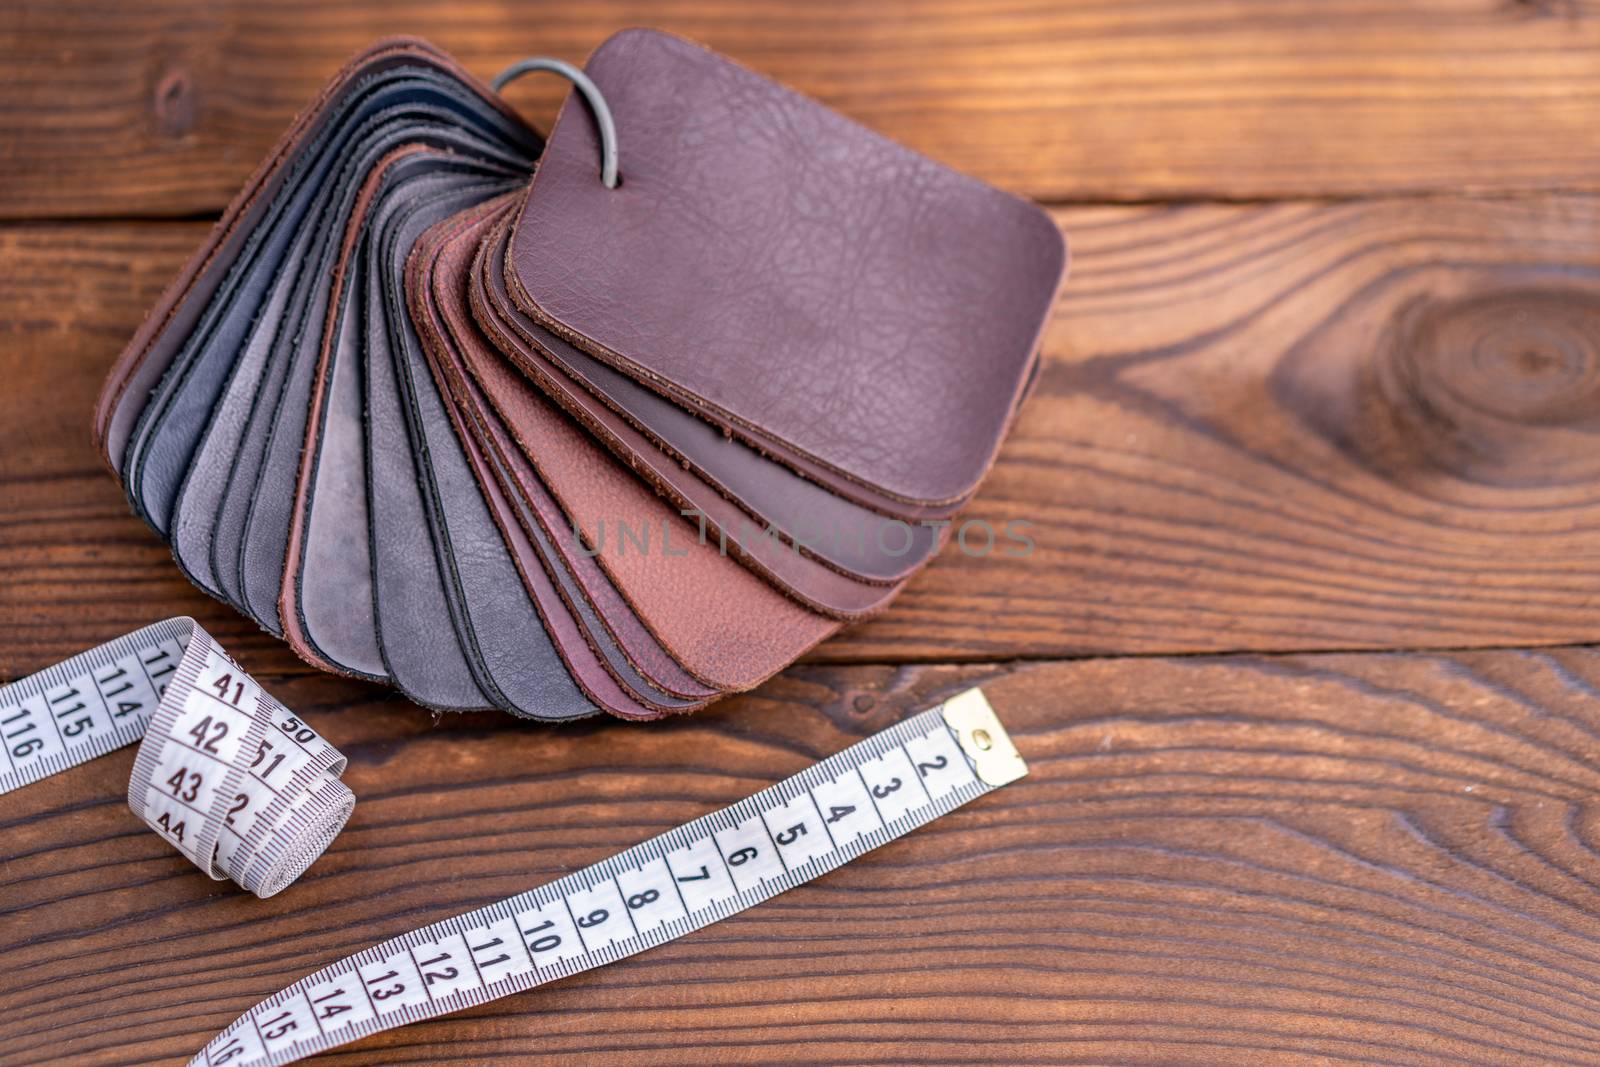 Leather samples for shoes and measuring tape on dark wooden table. Designer furniture clothes.